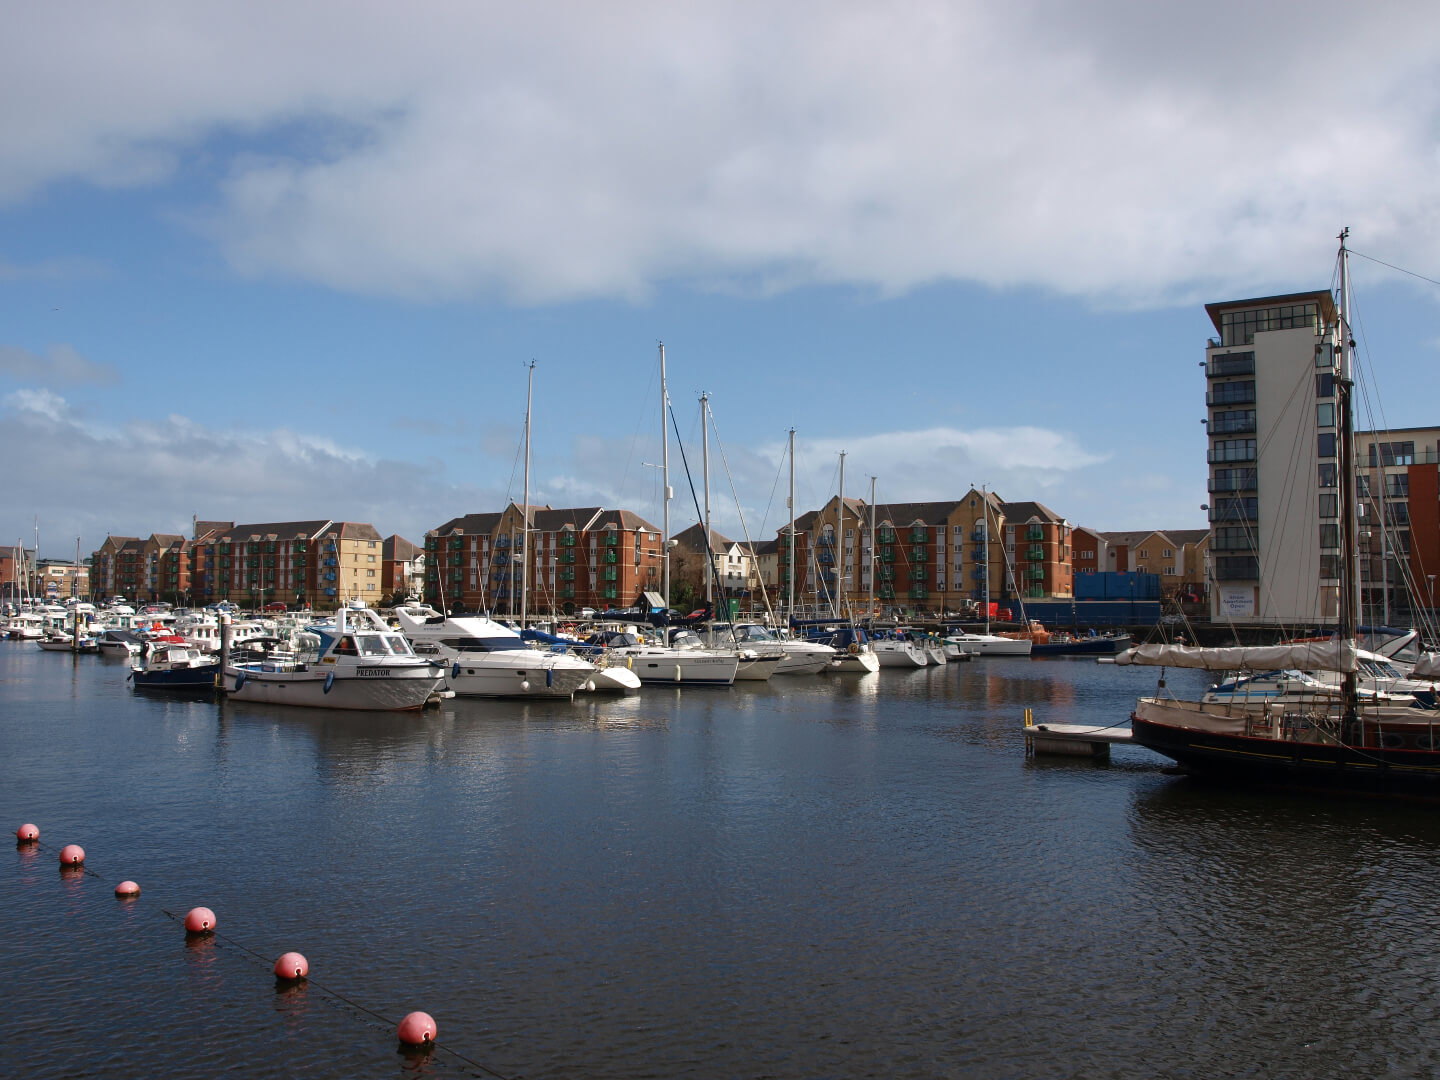 Student Accommodation in Swansea Marina, Swansea - boats in Swansea Marina on a clear day